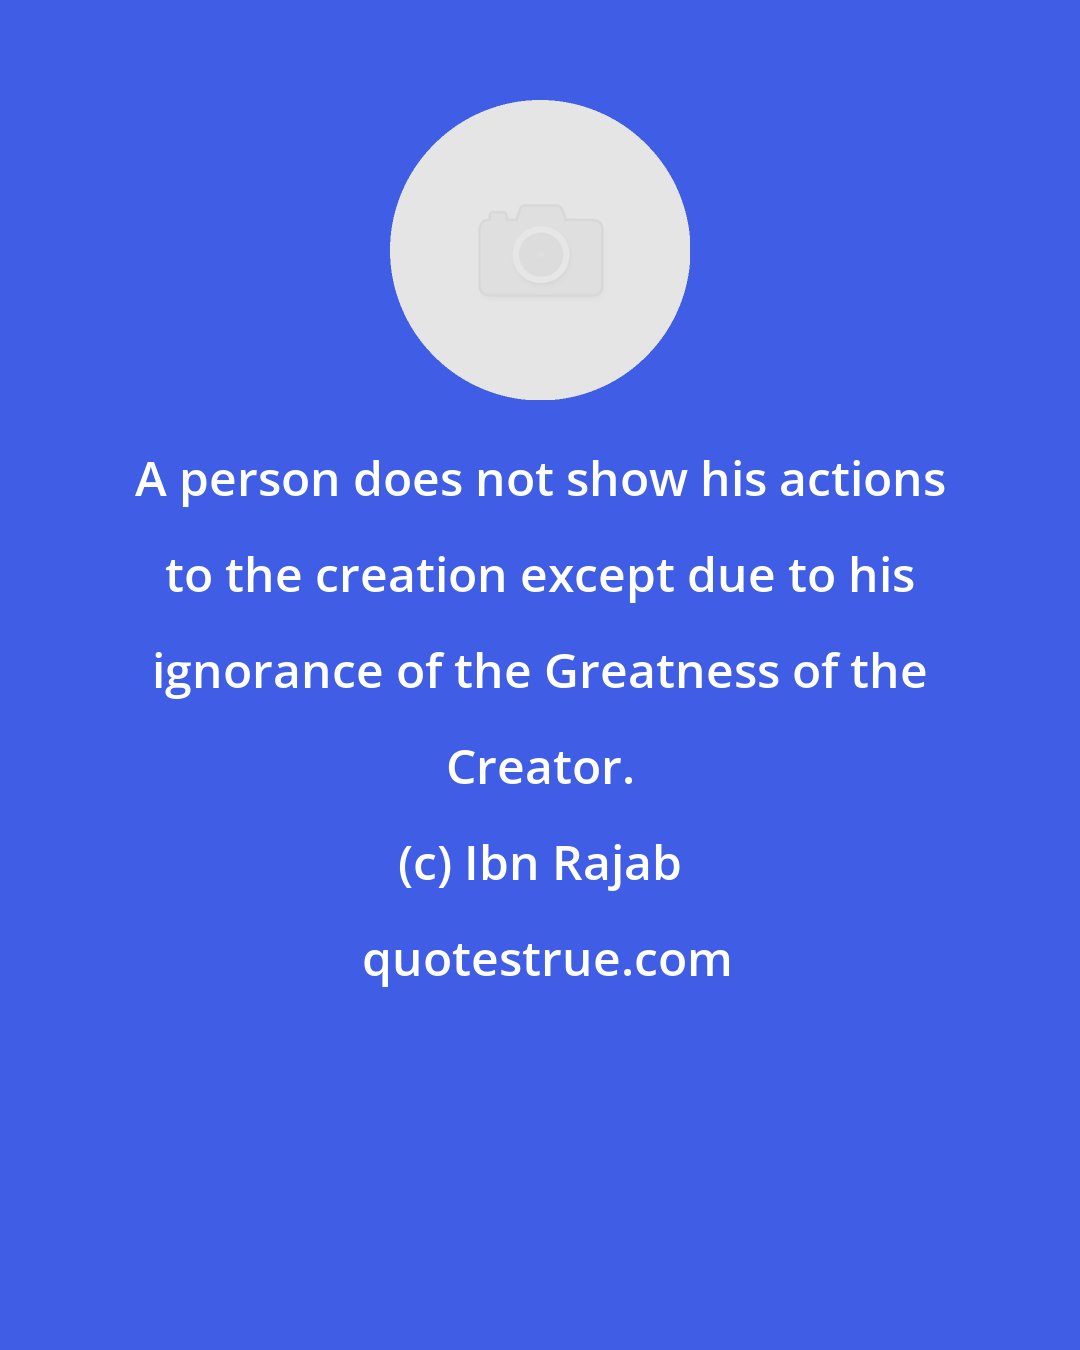 Ibn Rajab: A person does not show his actions to the creation except due to his ignorance of the Greatness of the Creator.